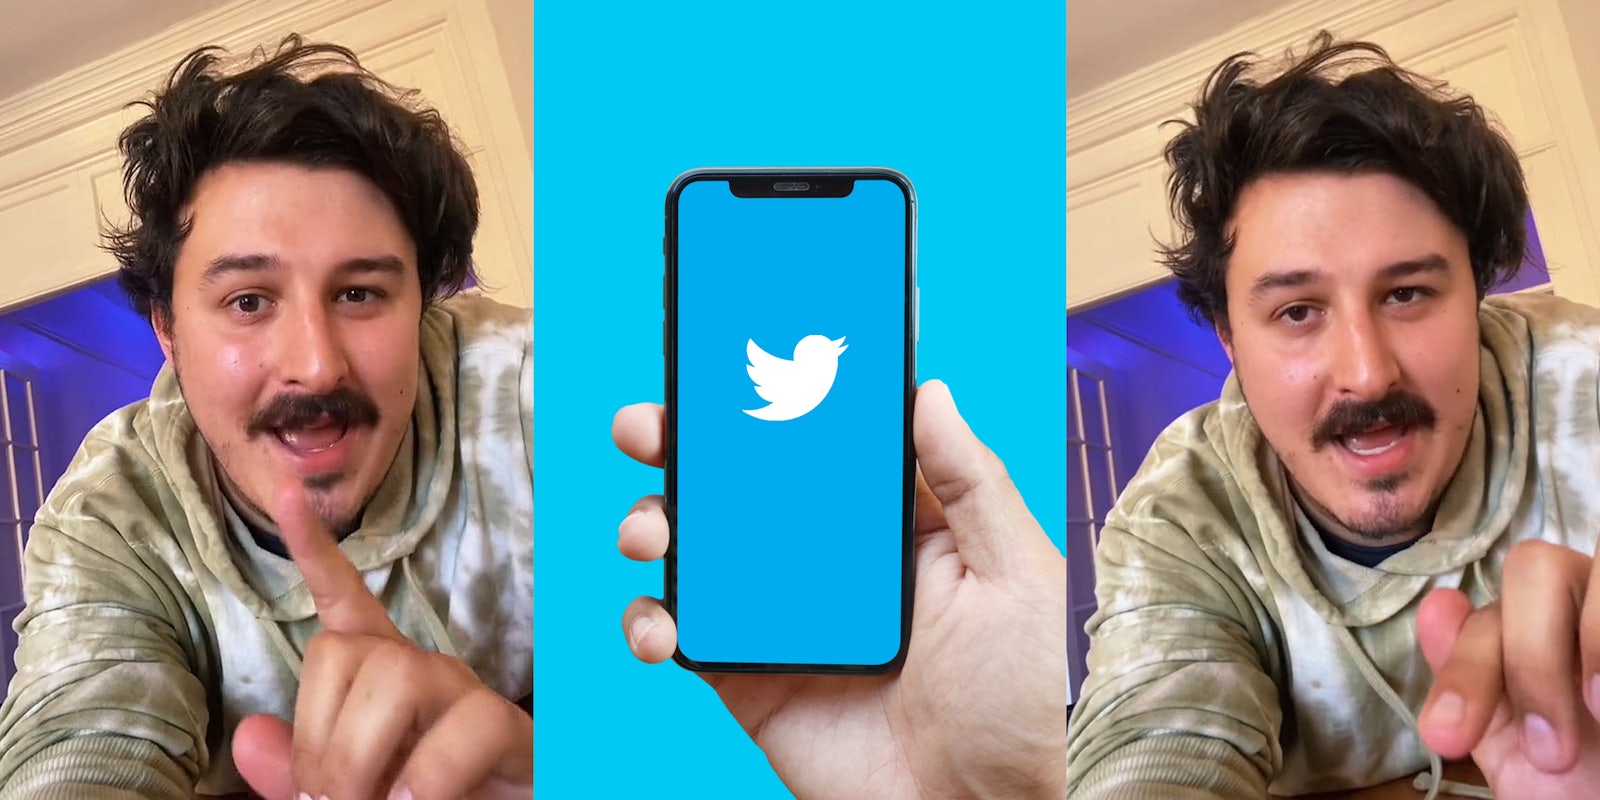 man speaking with finger up (l) hand holding phone with Twitter on screen over blue background (c) man speaking with finger out (r)